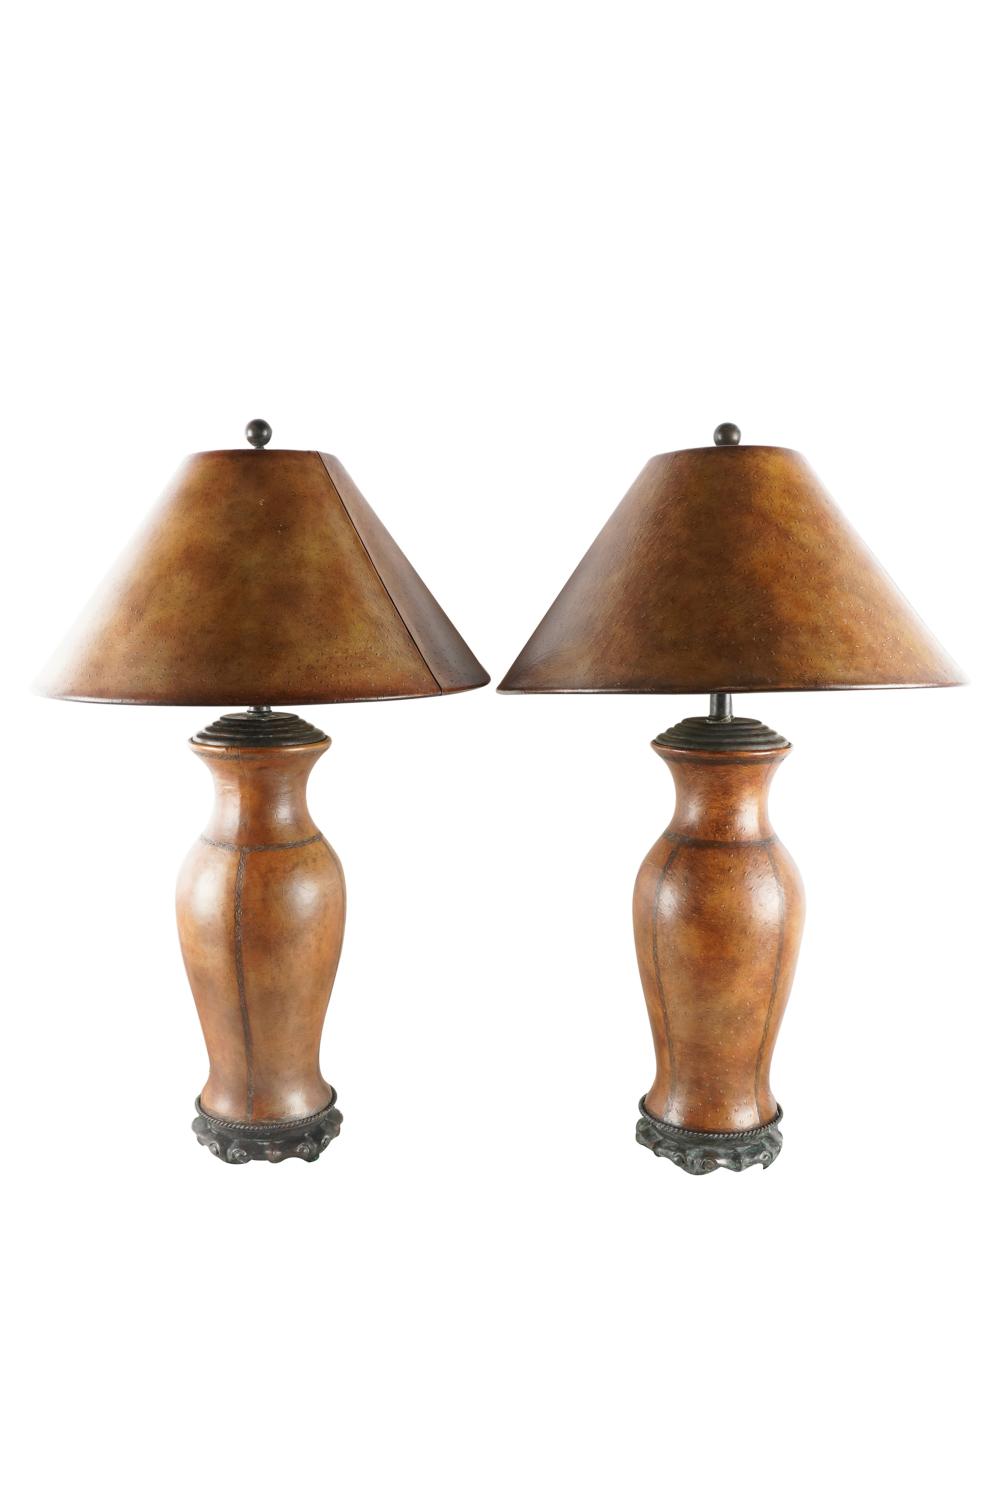 PAIR OF LEATHER WRAPPED TABLE LAMPSwith